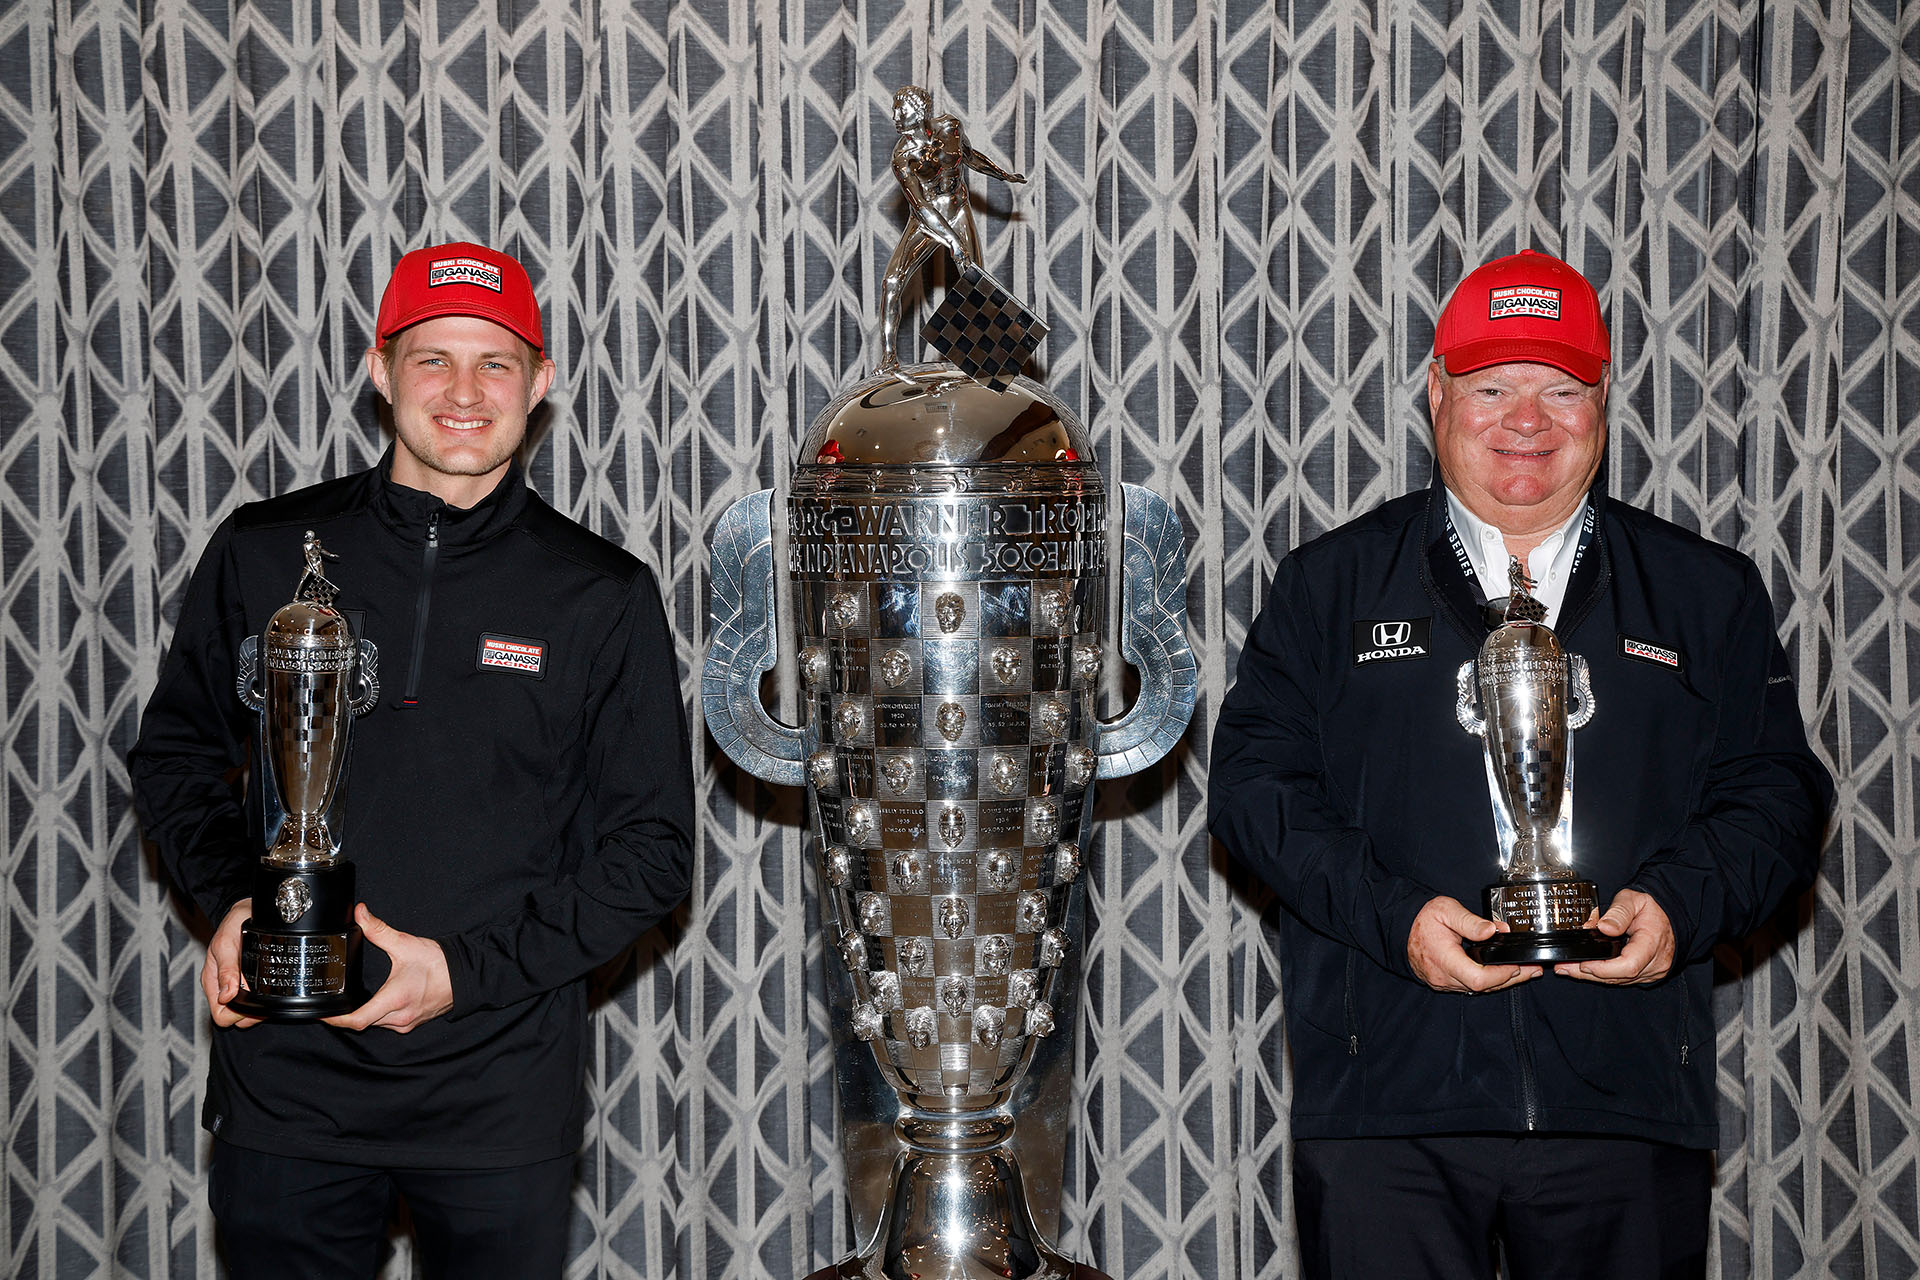 Two men in red hats stand next to large silver trophy while holding smaller trophies